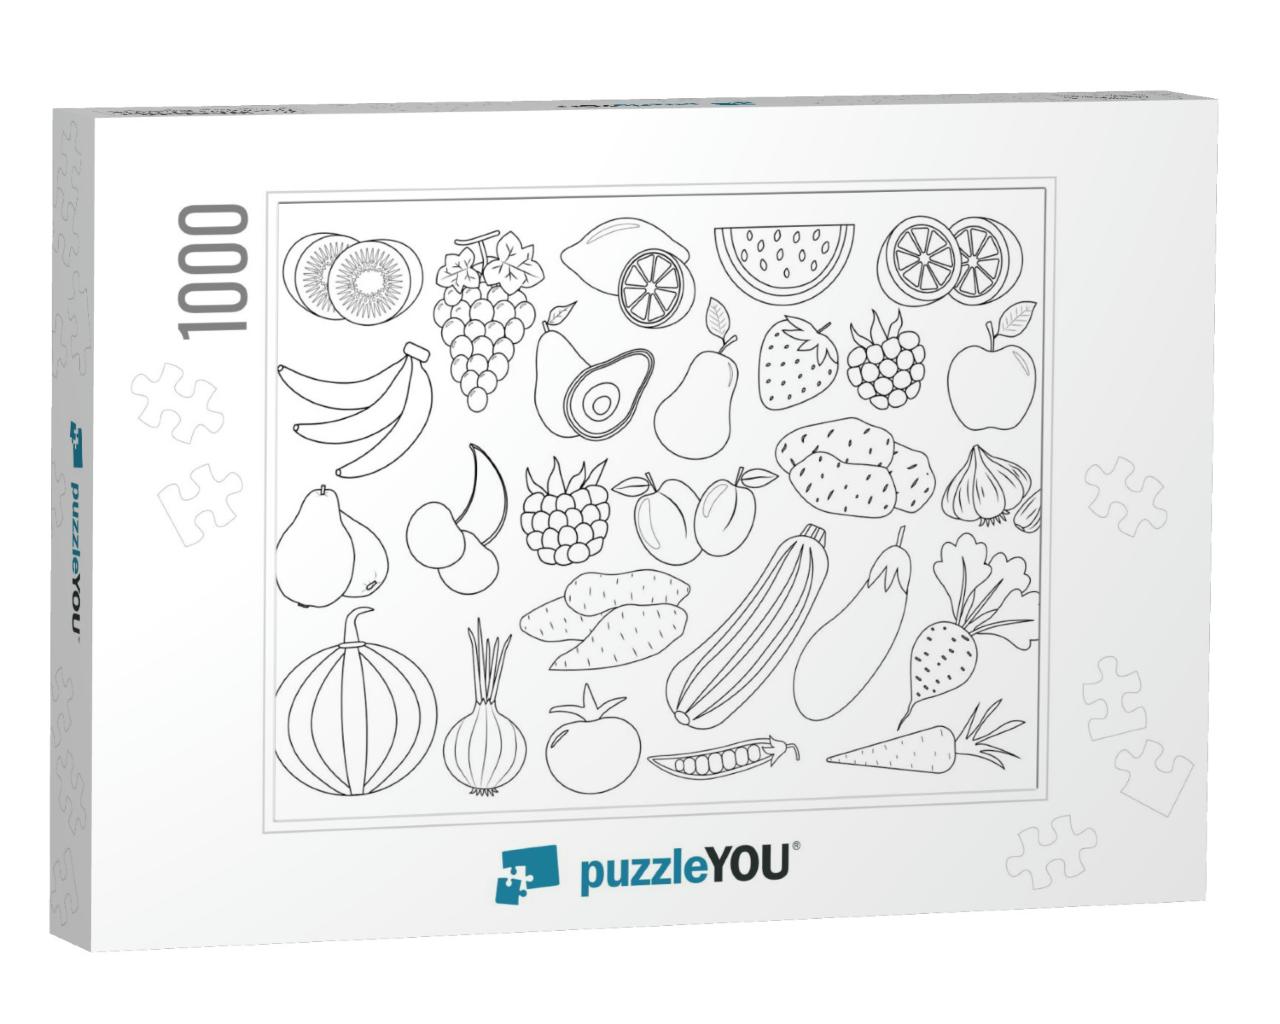 Coloring Book Page. Fruits, Berries & Vegetables Cartoon... Jigsaw Puzzle with 1000 pieces